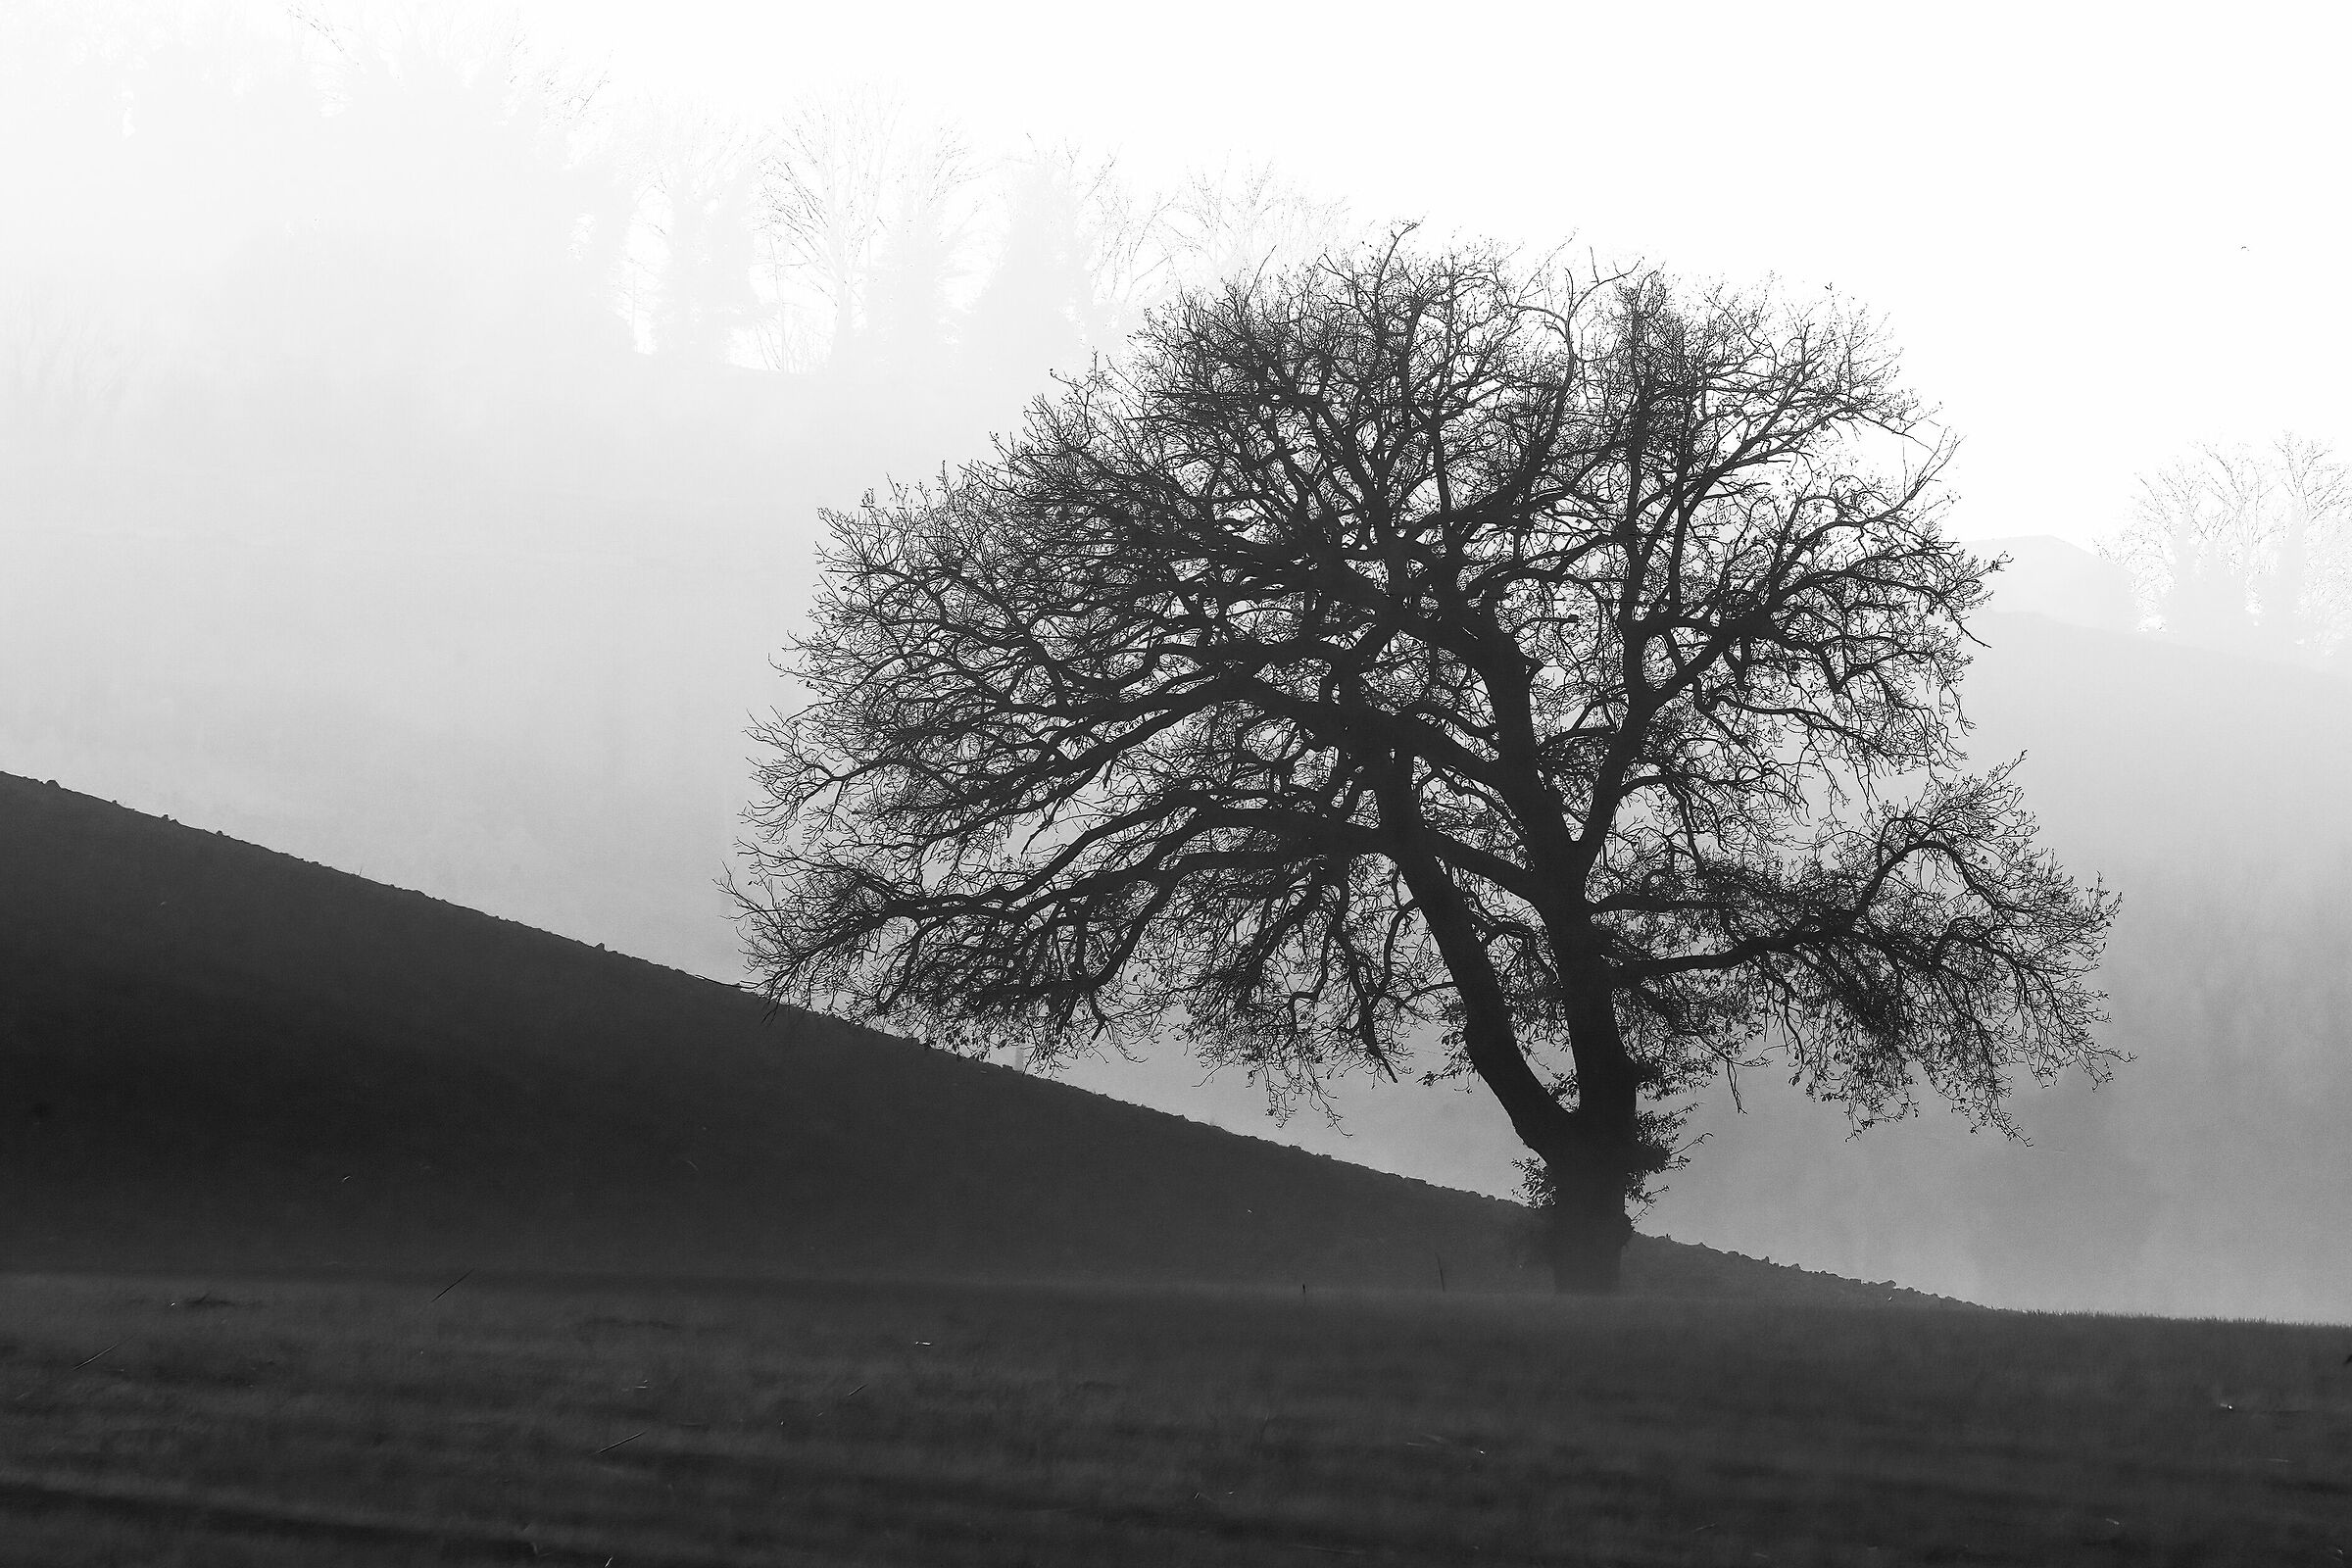 Tree from the Mist...